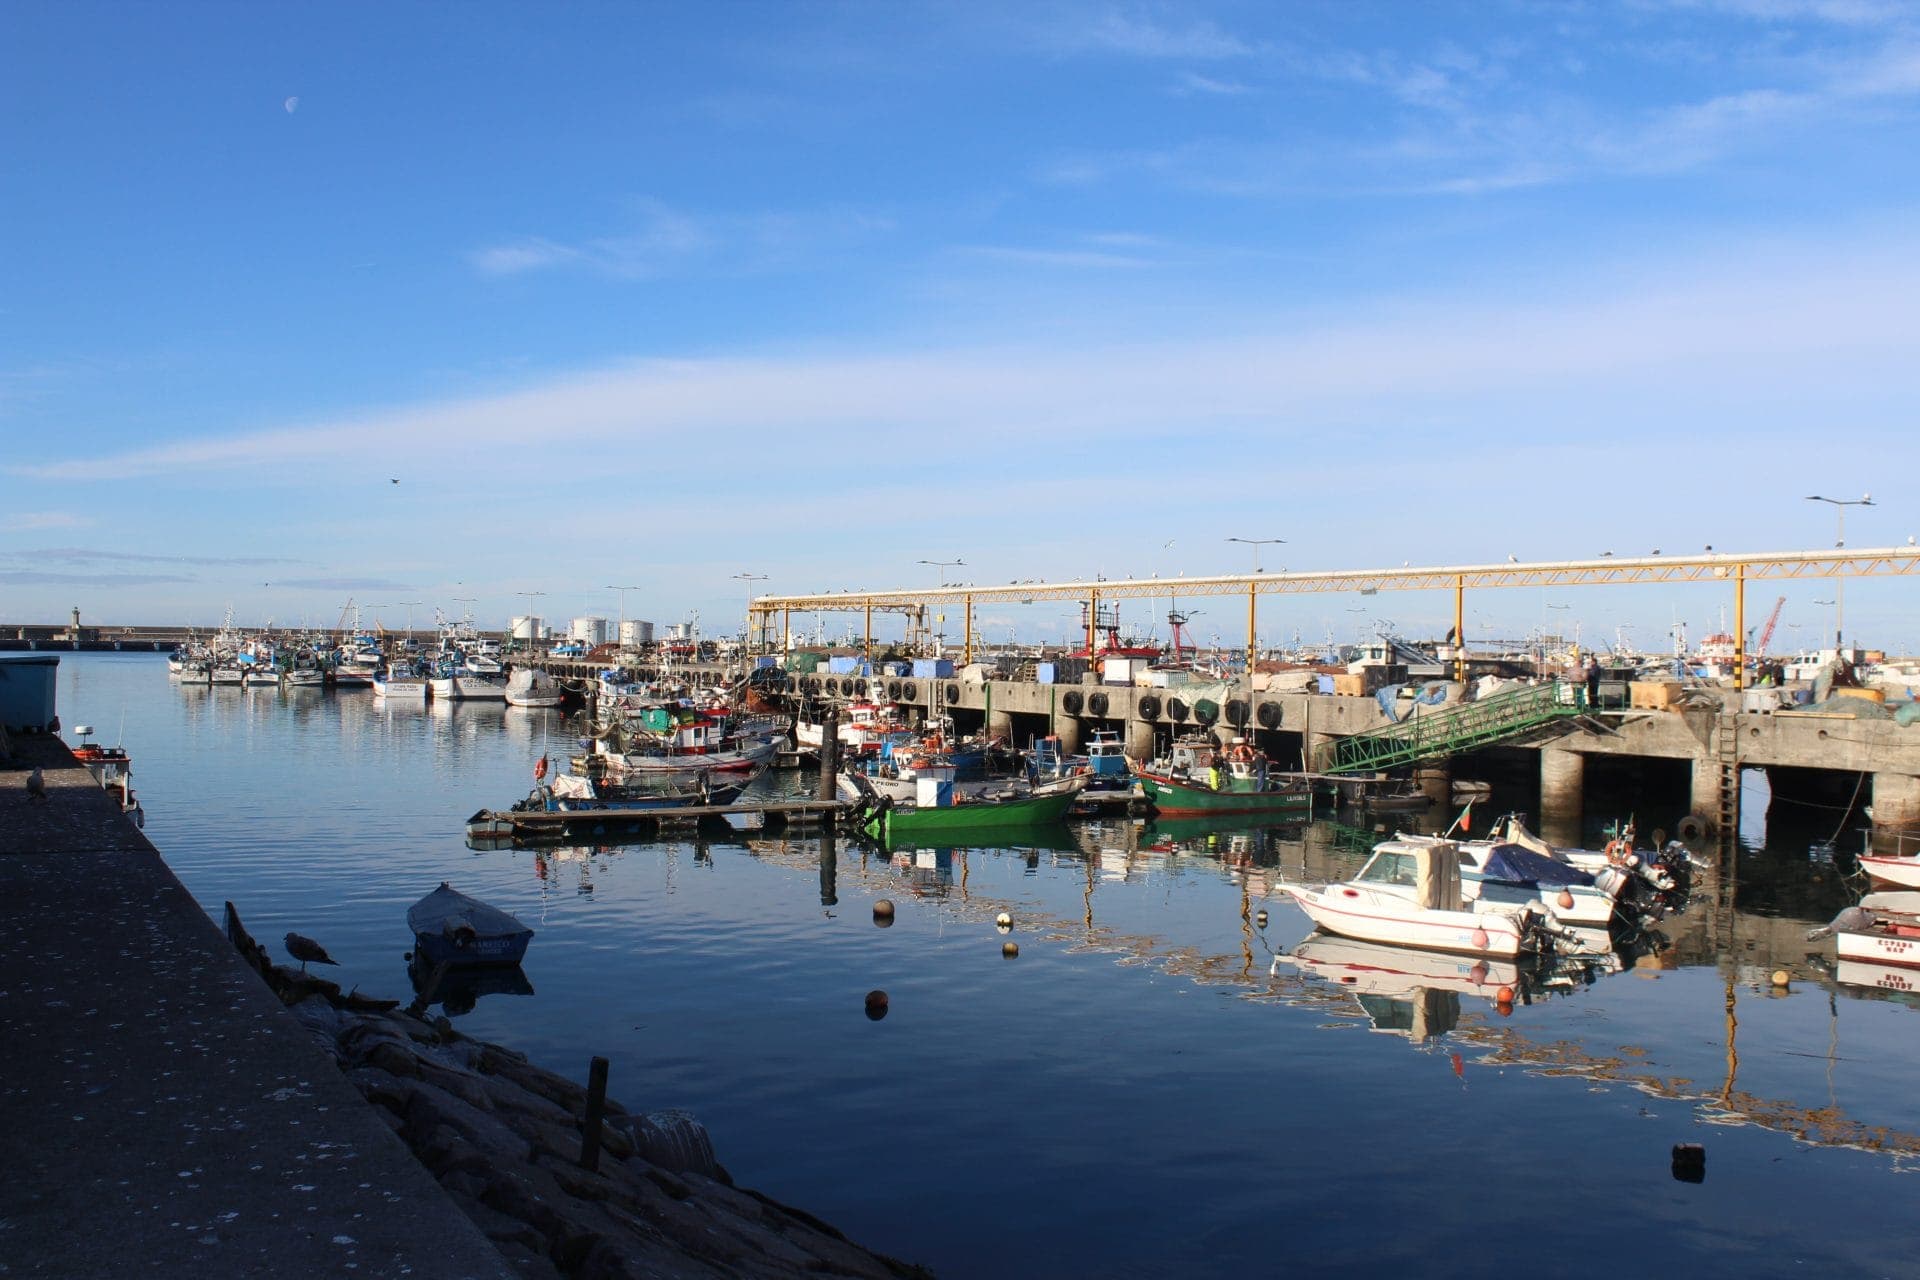 cleaning and waste management services in the fishing port of Matosinhos